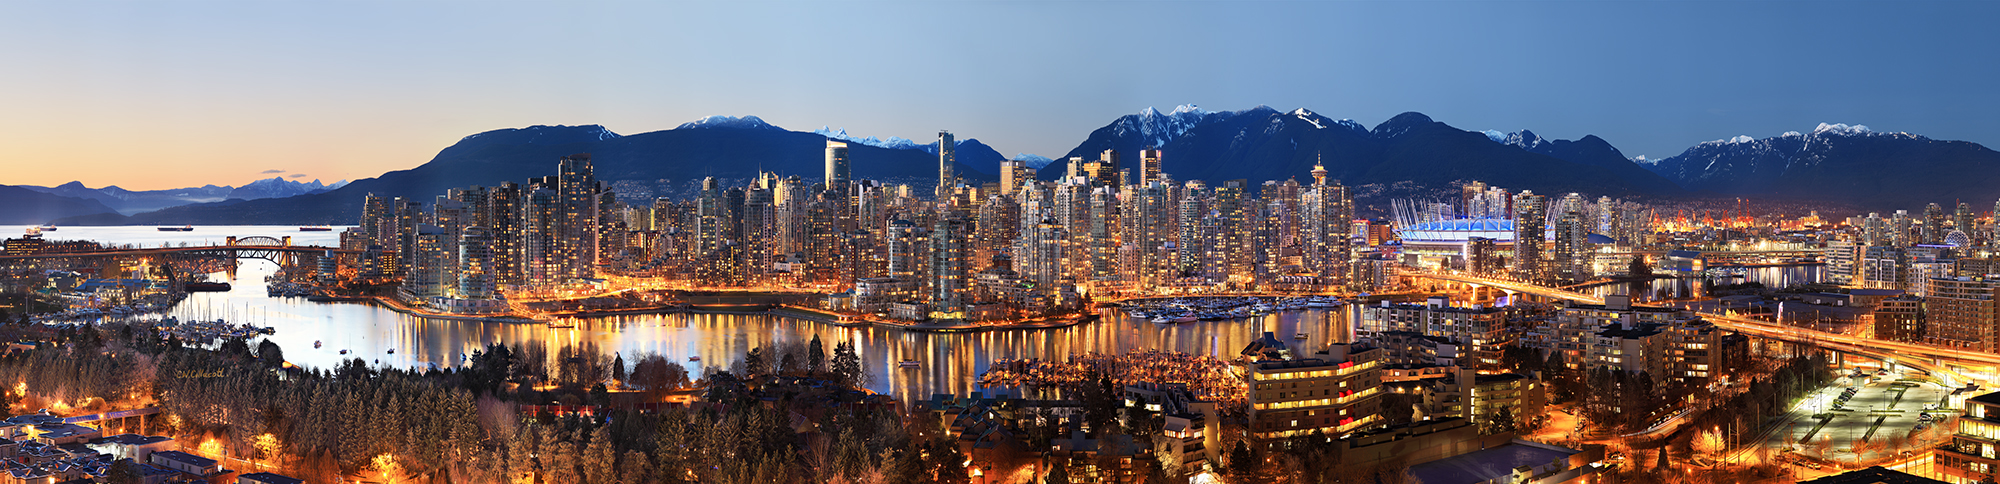 Ultra-High-Resolution-Panoramic-Image-Vancouver-Vancouver-Skyline-Westcoast-BC-Canada-Gigapixel